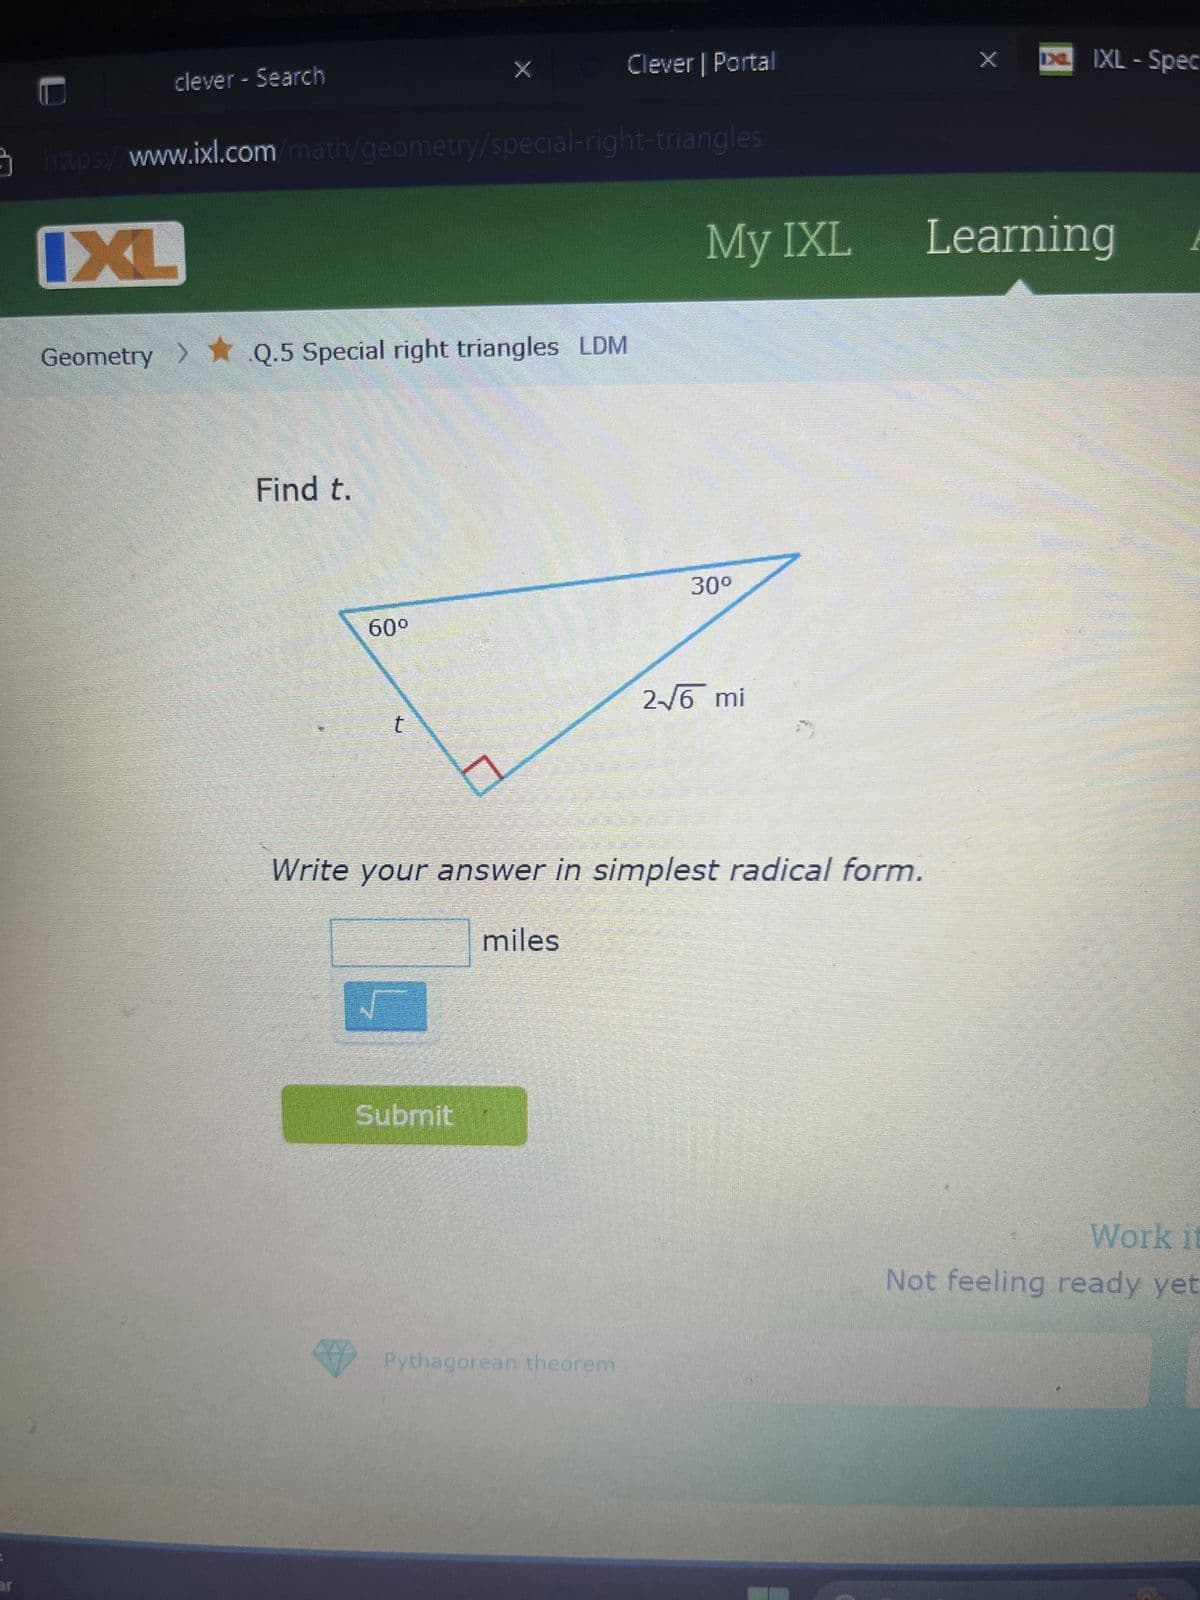 JE
clever - Search
Clever | Portal
https://www.ixl.com/math/geometry/special-right-triangles
IXL
Geometry > ✶ Q.5 Special right triangles LDM
Find t.
60°
IXL - Spec
My IXL
Learning
30º
2-√6 mi
t
Write your answer in simplest radical form.
miles
Submit
Pythagorean theorem
Work it
Not feeling ready yet